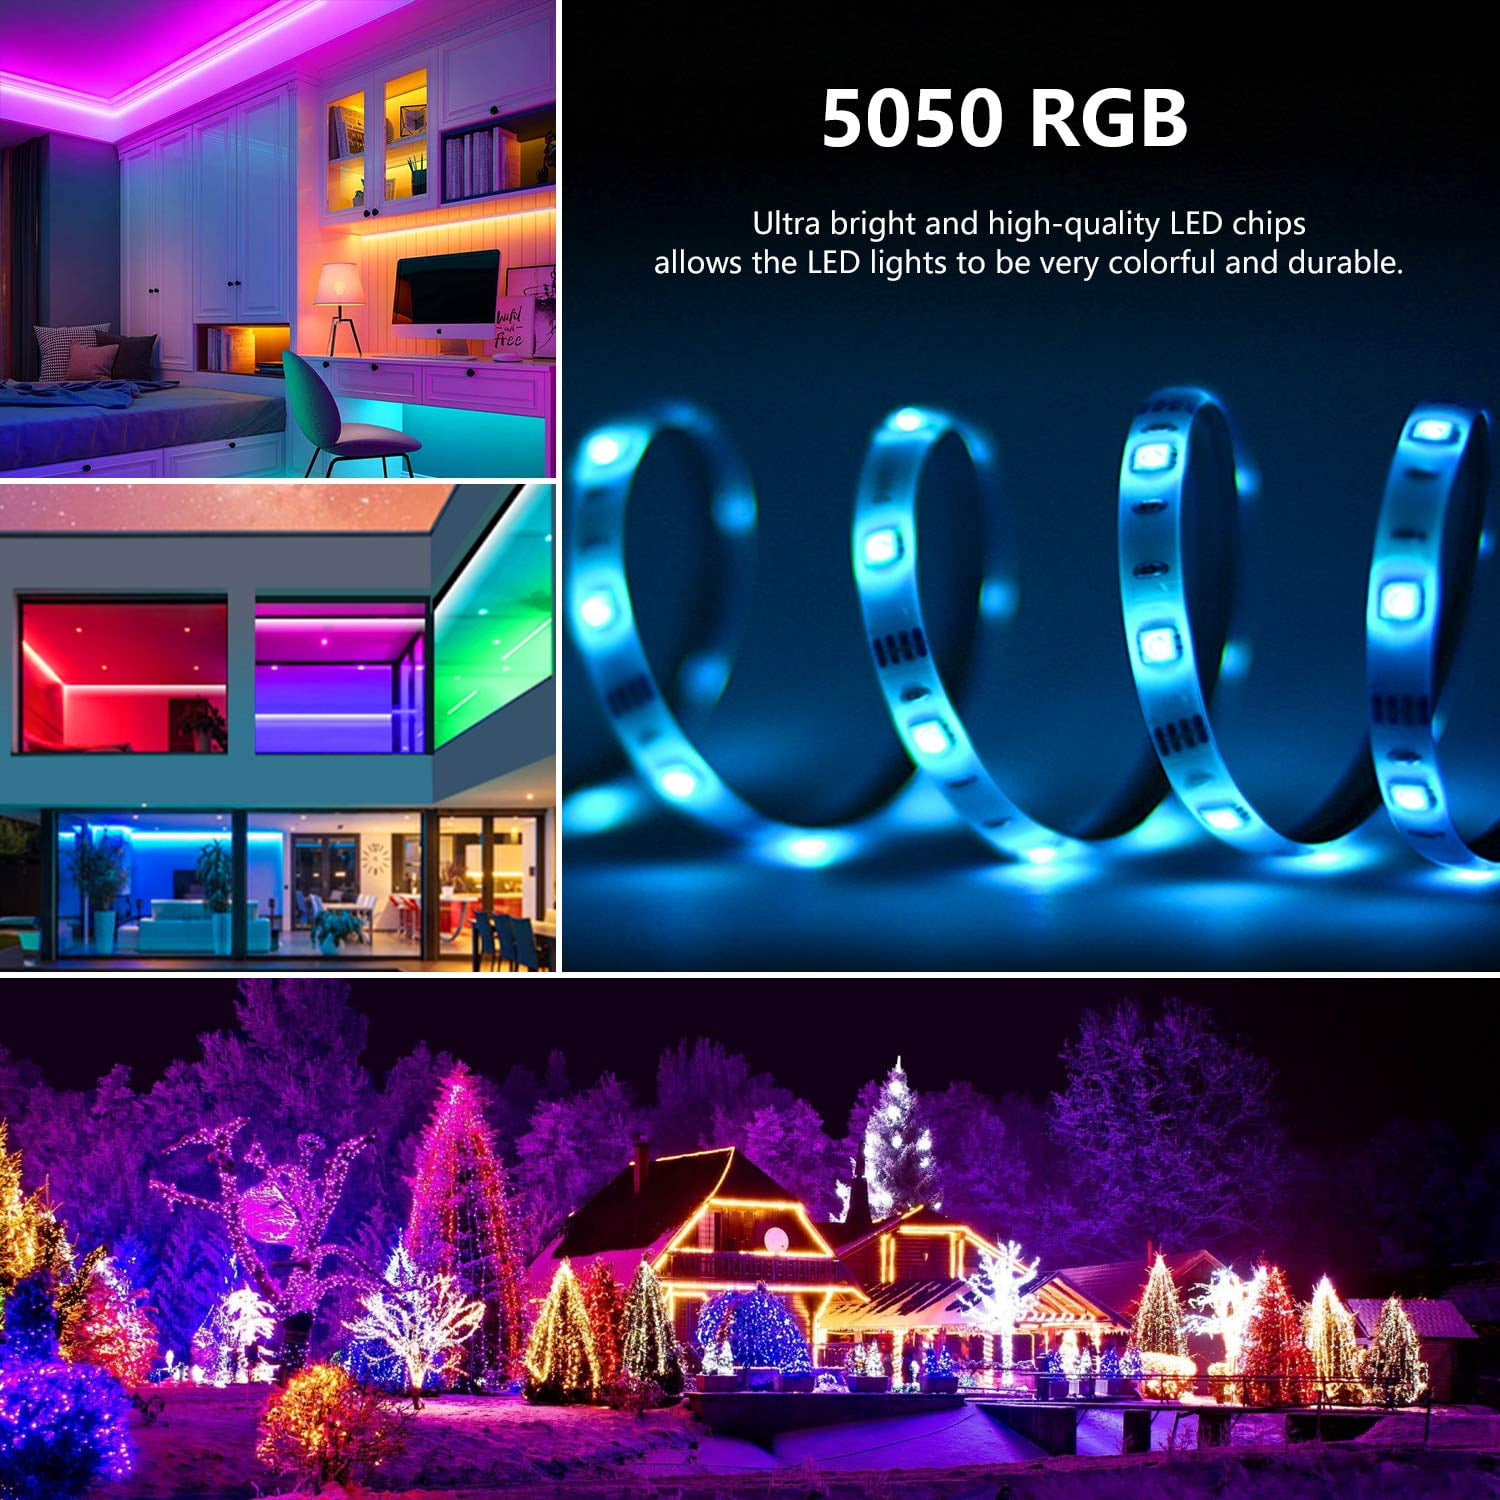 Led Strip 5m Dream Color, Tasmor Rgb+ic Smart Led Strip, Led Strip  Compatible With Alexa Google Home App Control, Self Adhesive Sync With  Music, For P